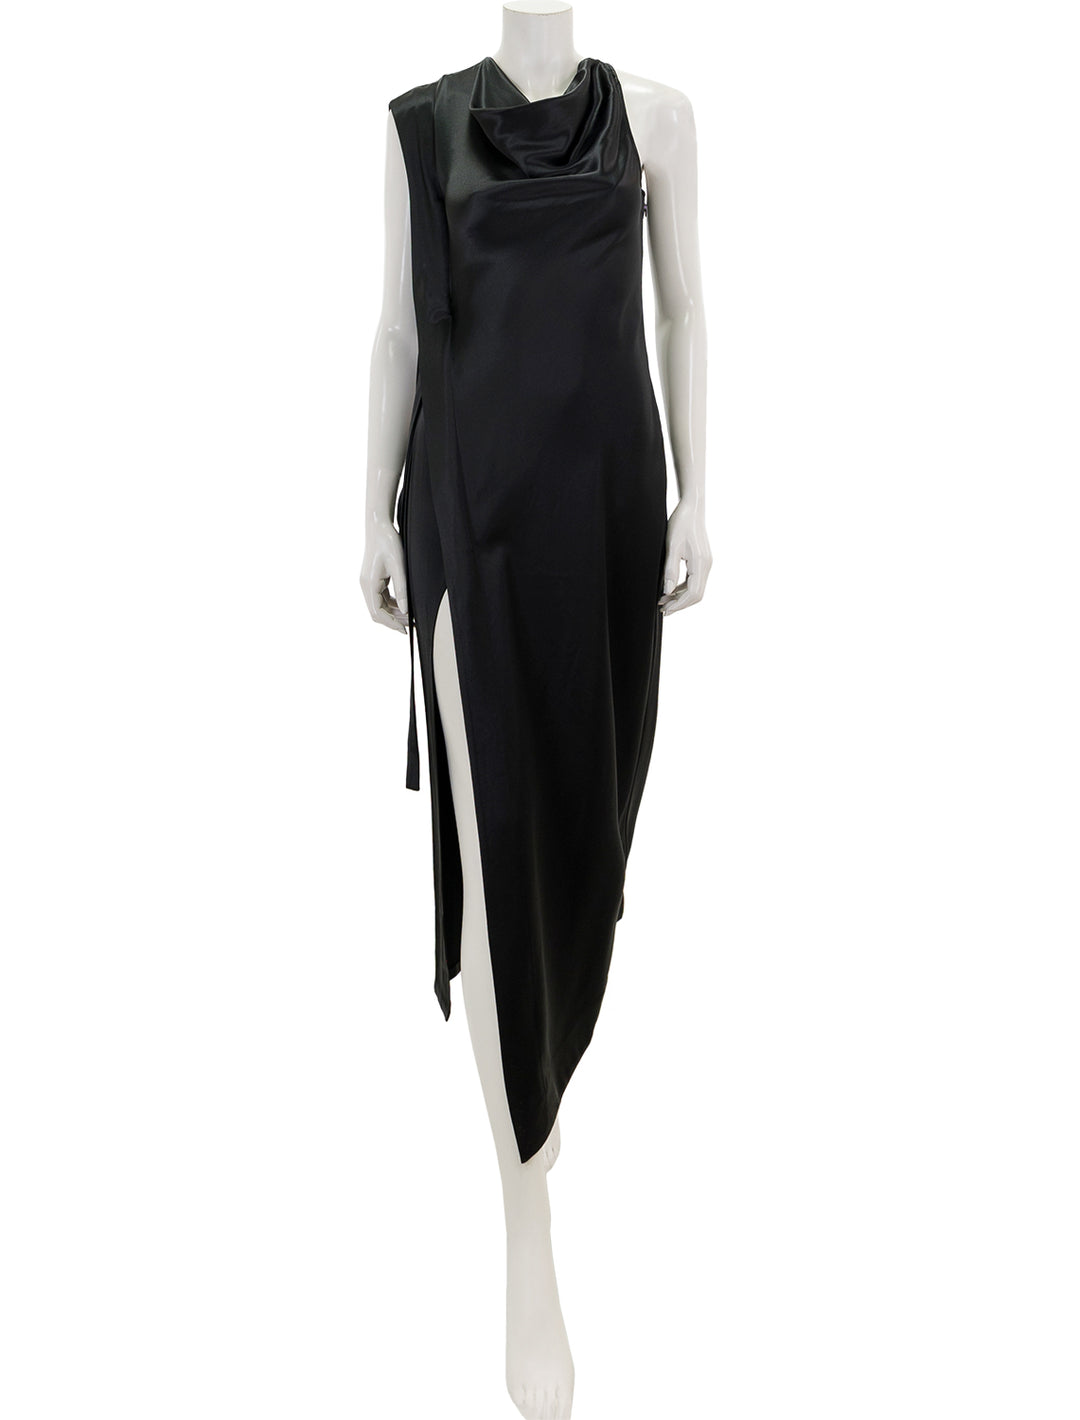 Front view of STAUD's troupe dress in black.